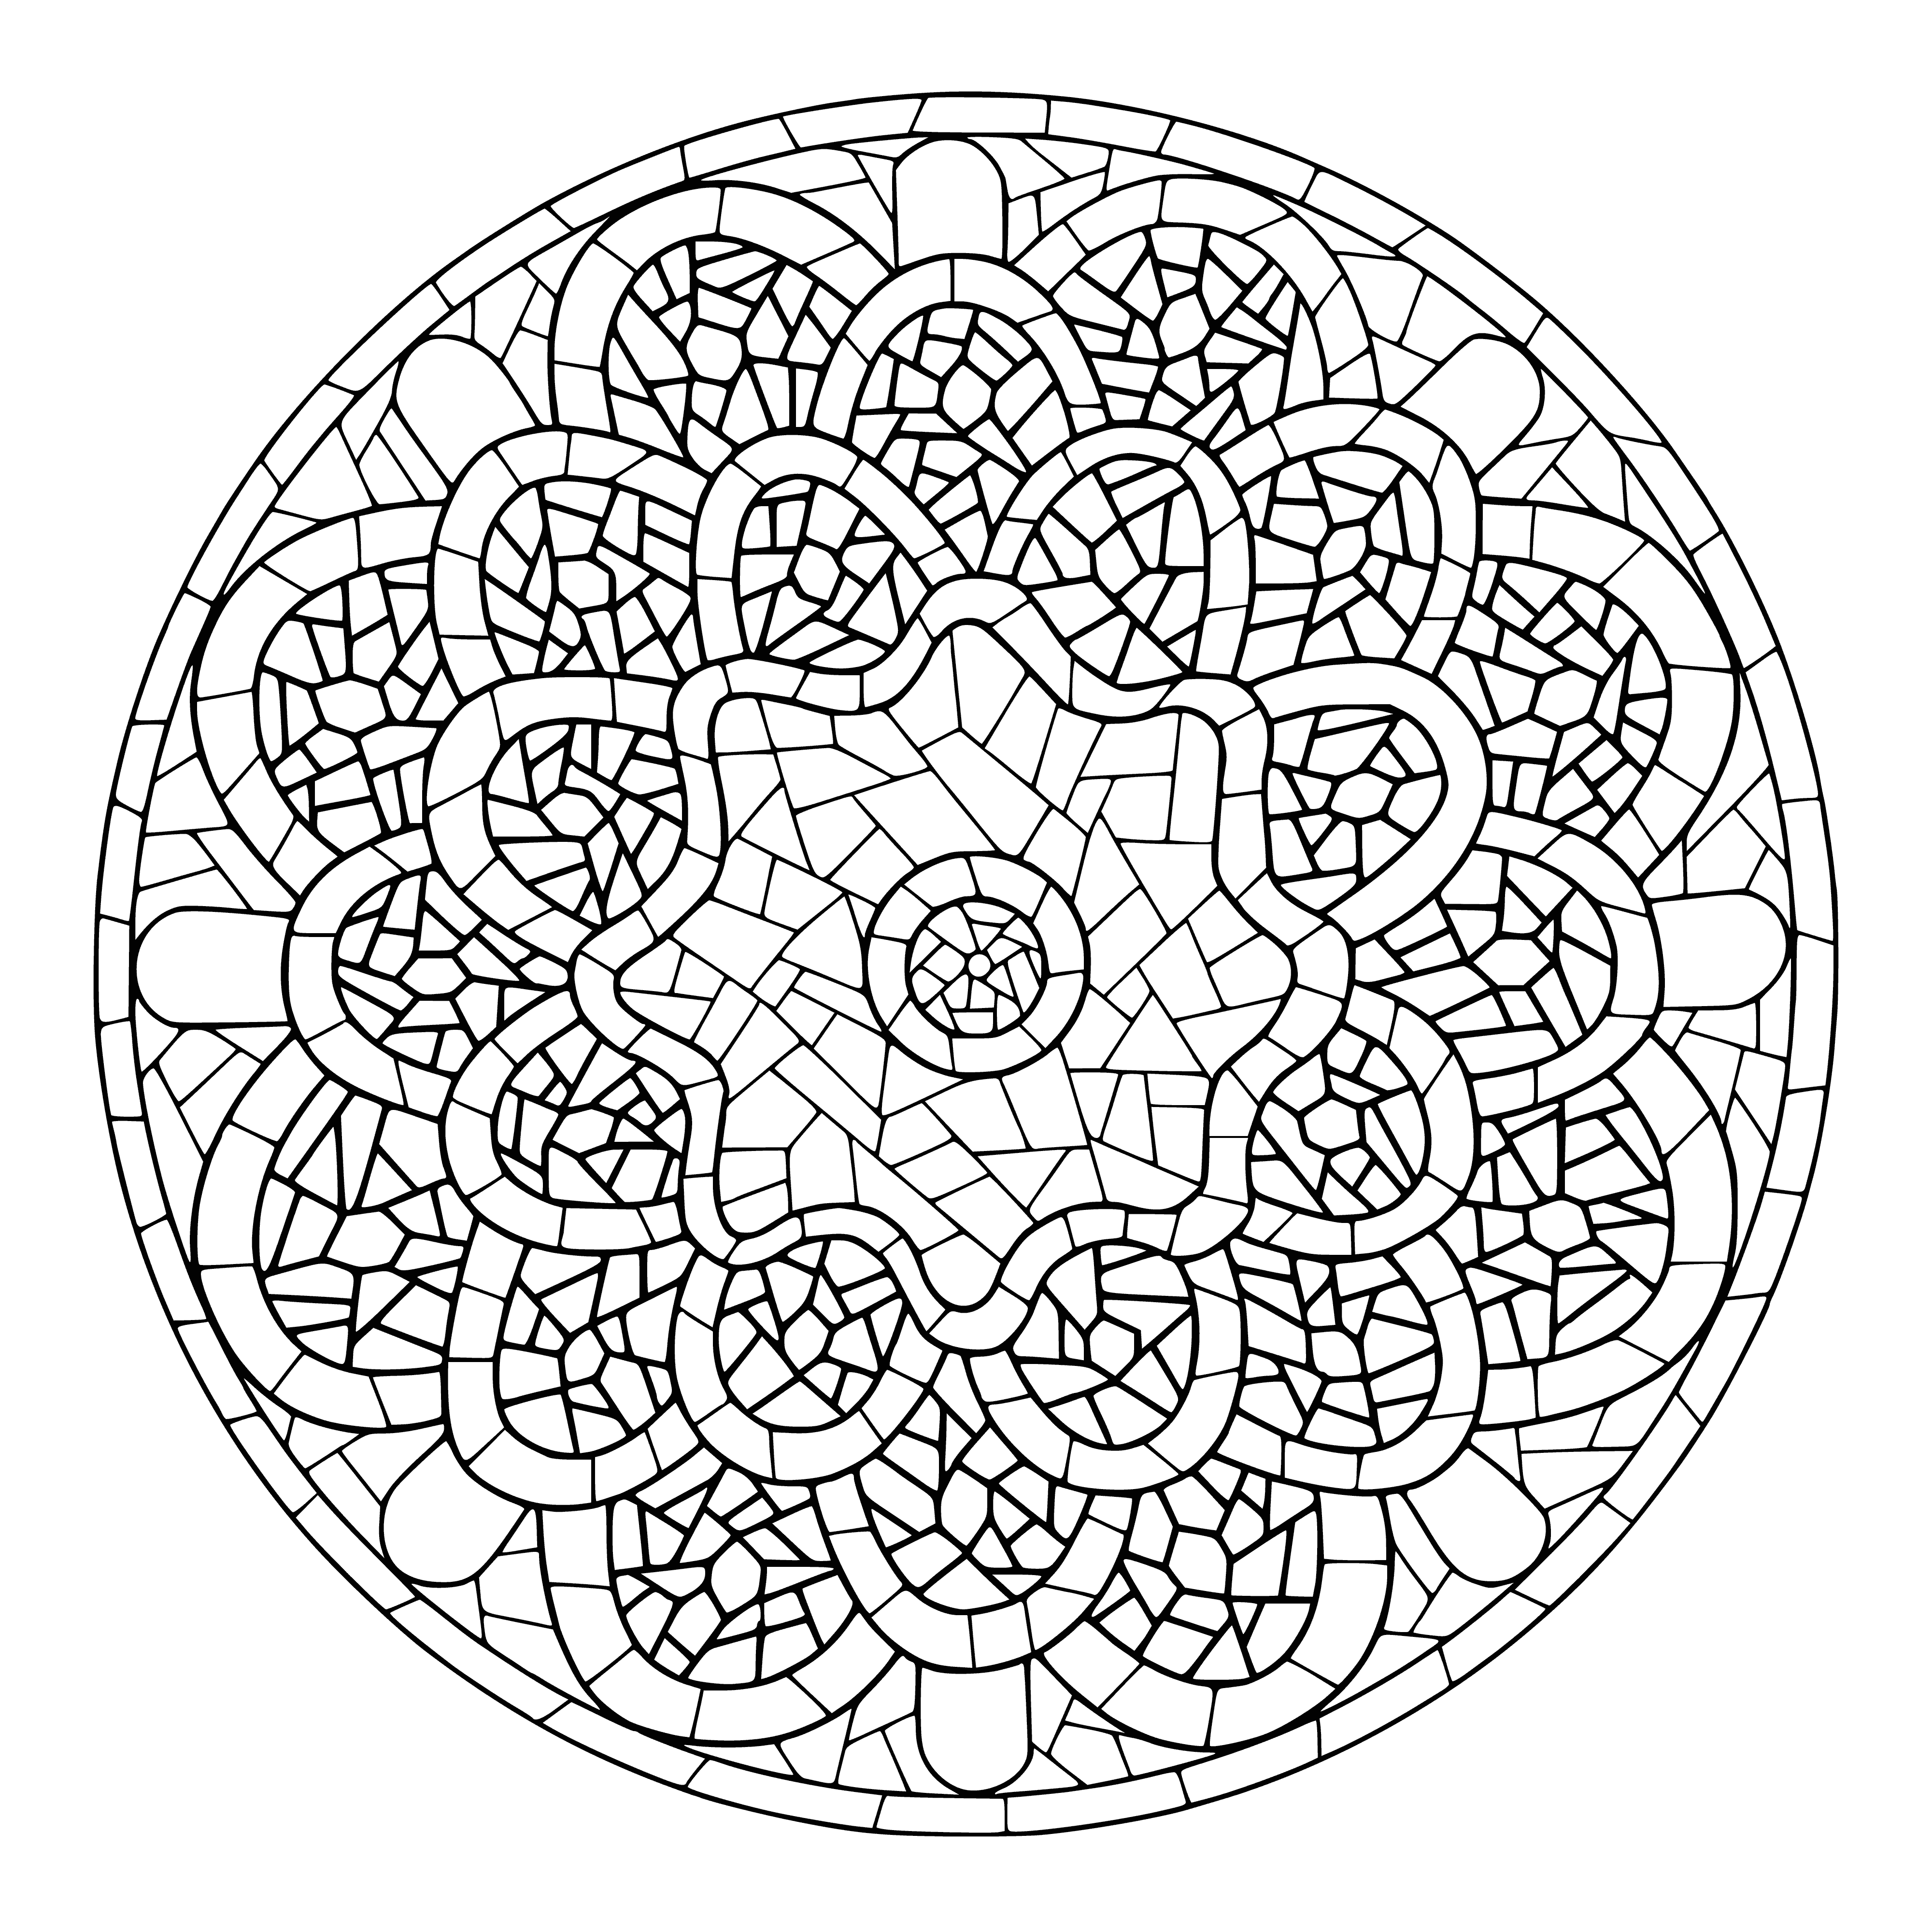 coloring page: Intricate designs & colorful details fill a large center & smaller circles around it in a mandala.